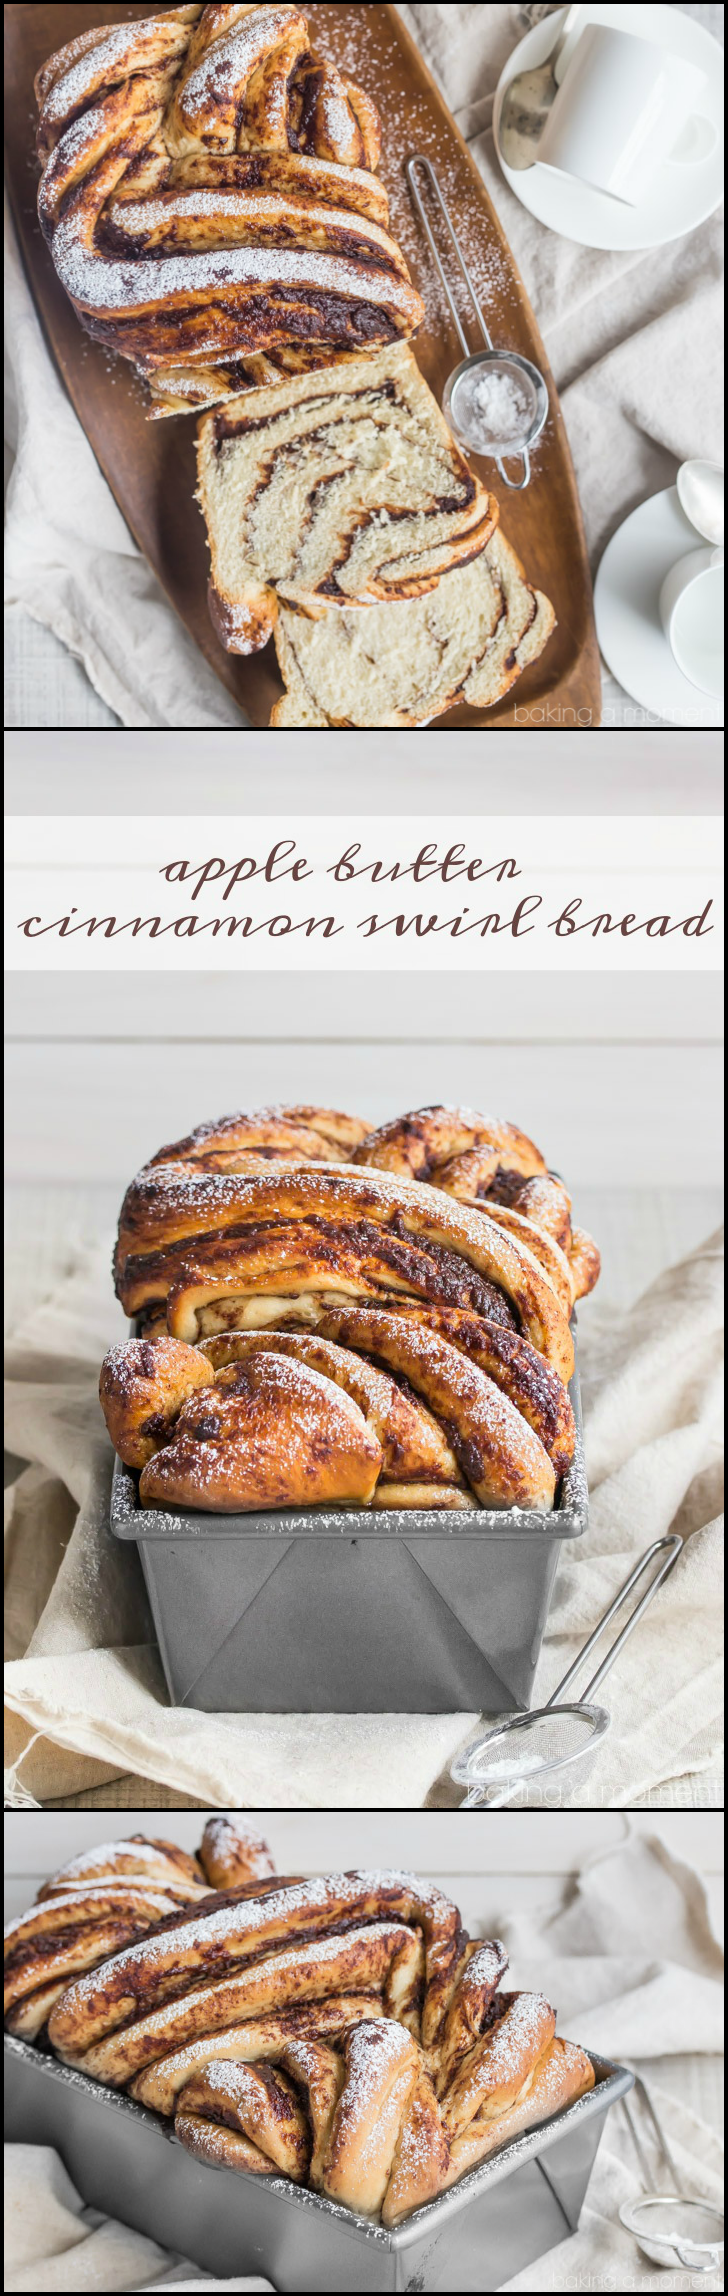 Apple Butter Cinnamon Swirl Bread- This bread was easy to make, so moist, and had plenty of apple butter and cinnamon sugar in